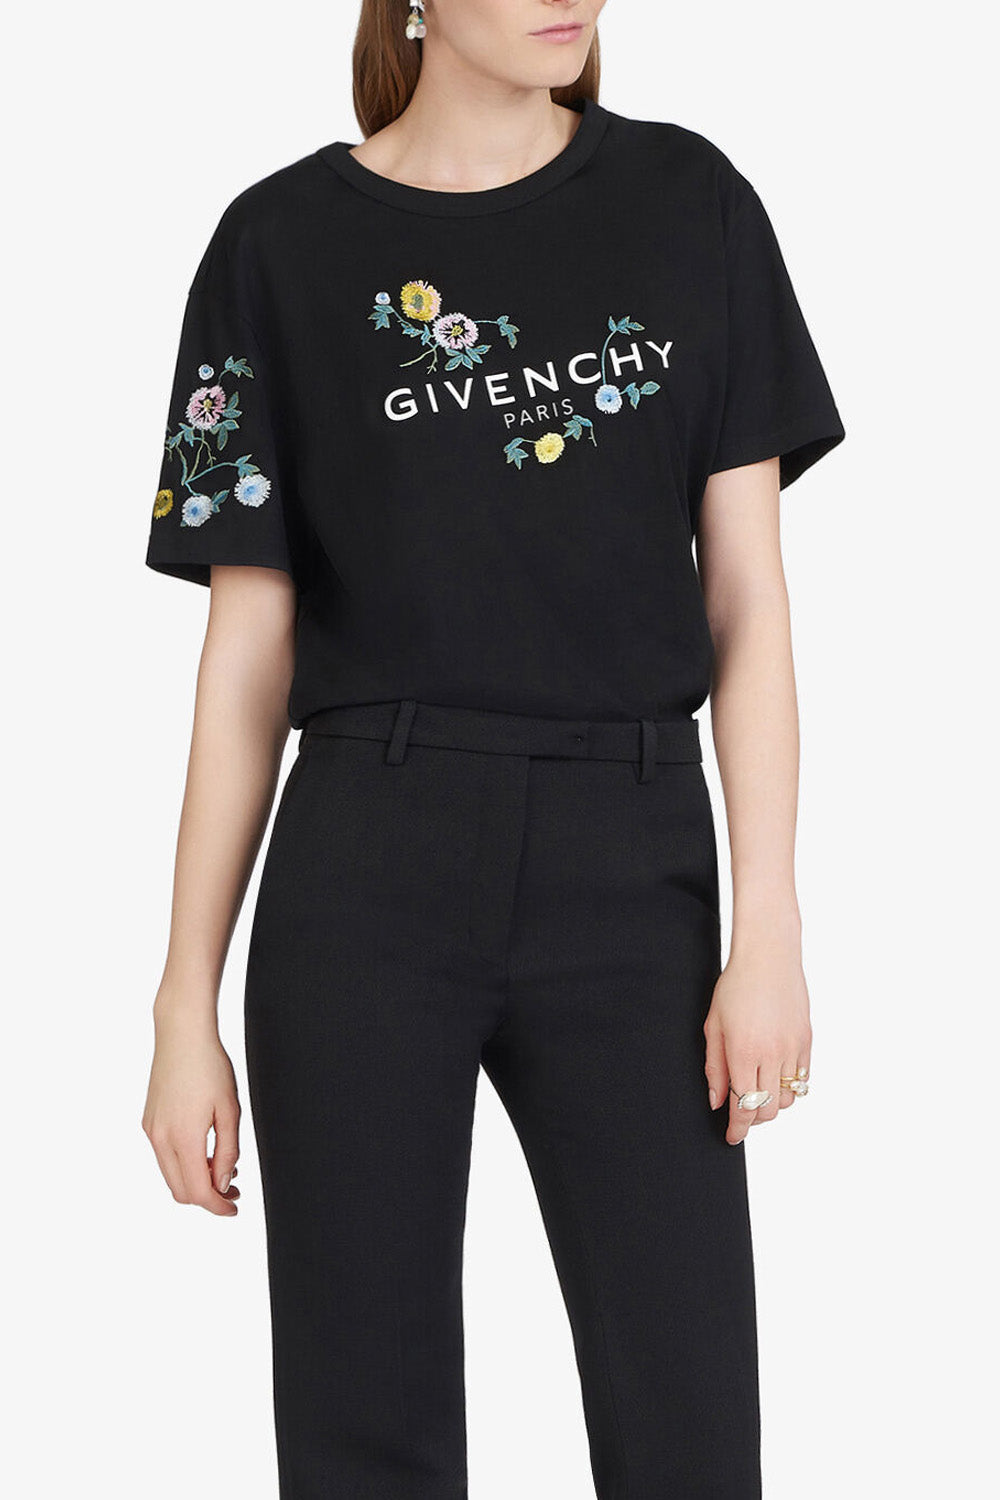 Givenchy logo flowers t-shirt